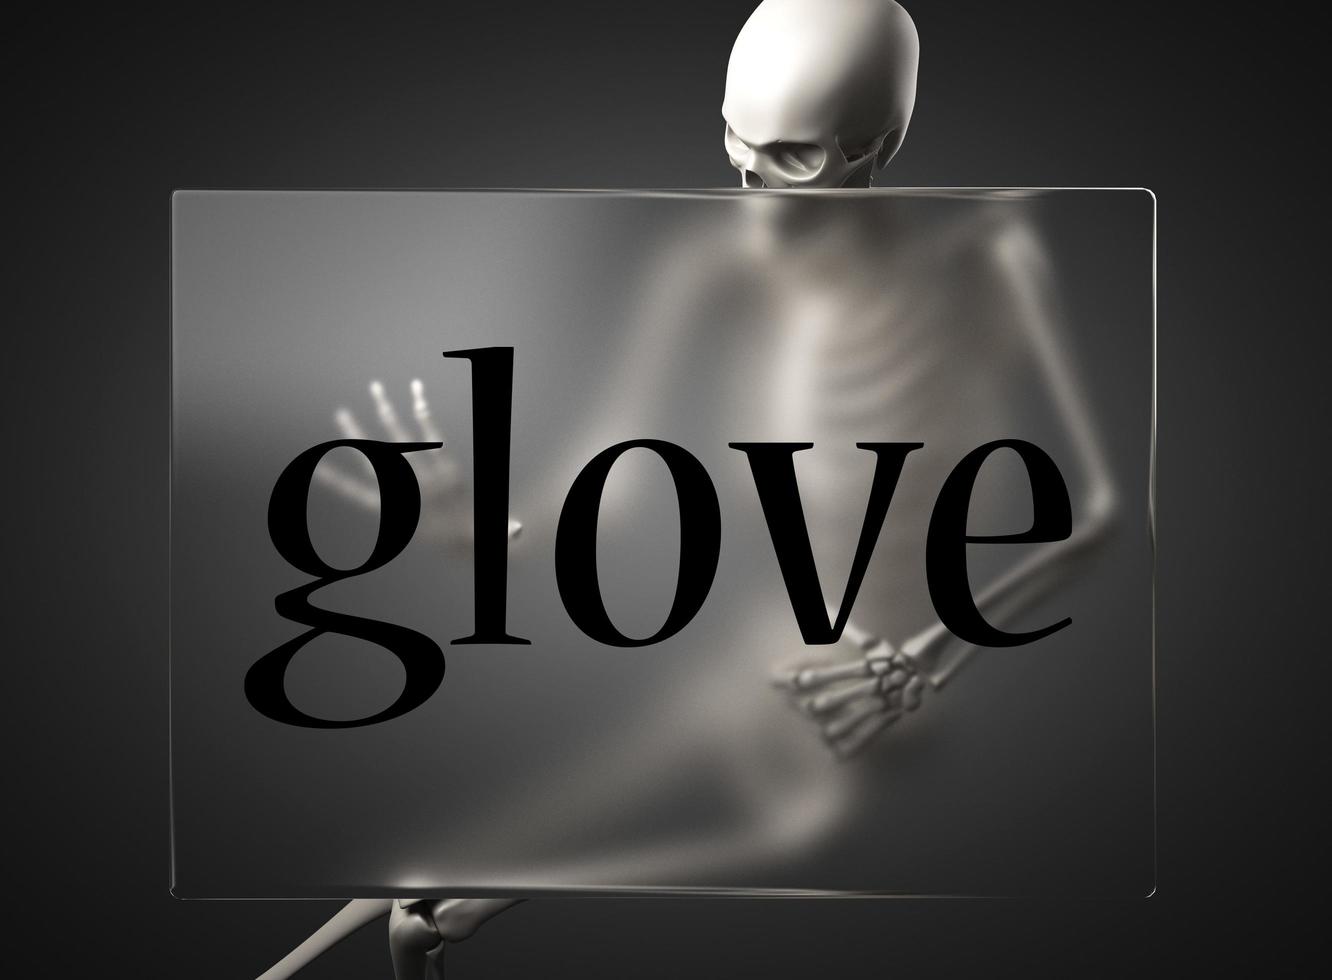 glove word on glass and skeleton photo